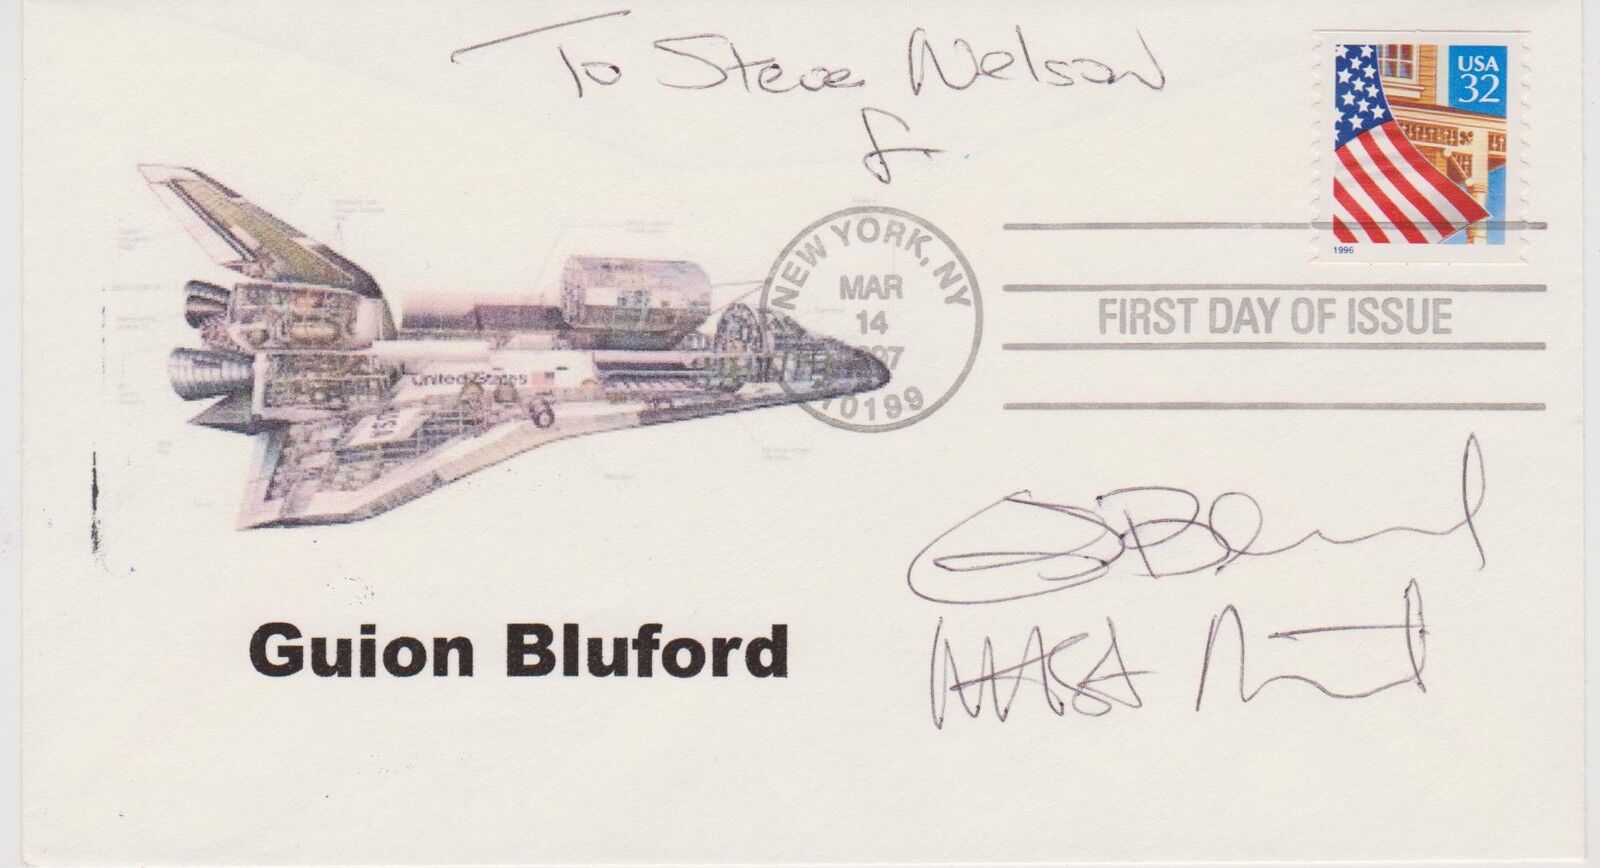 SIGNED NASA ASTRONAUT GUION BLUFORD  FDC - AUTOGRAPHED FIRST DAY COVER